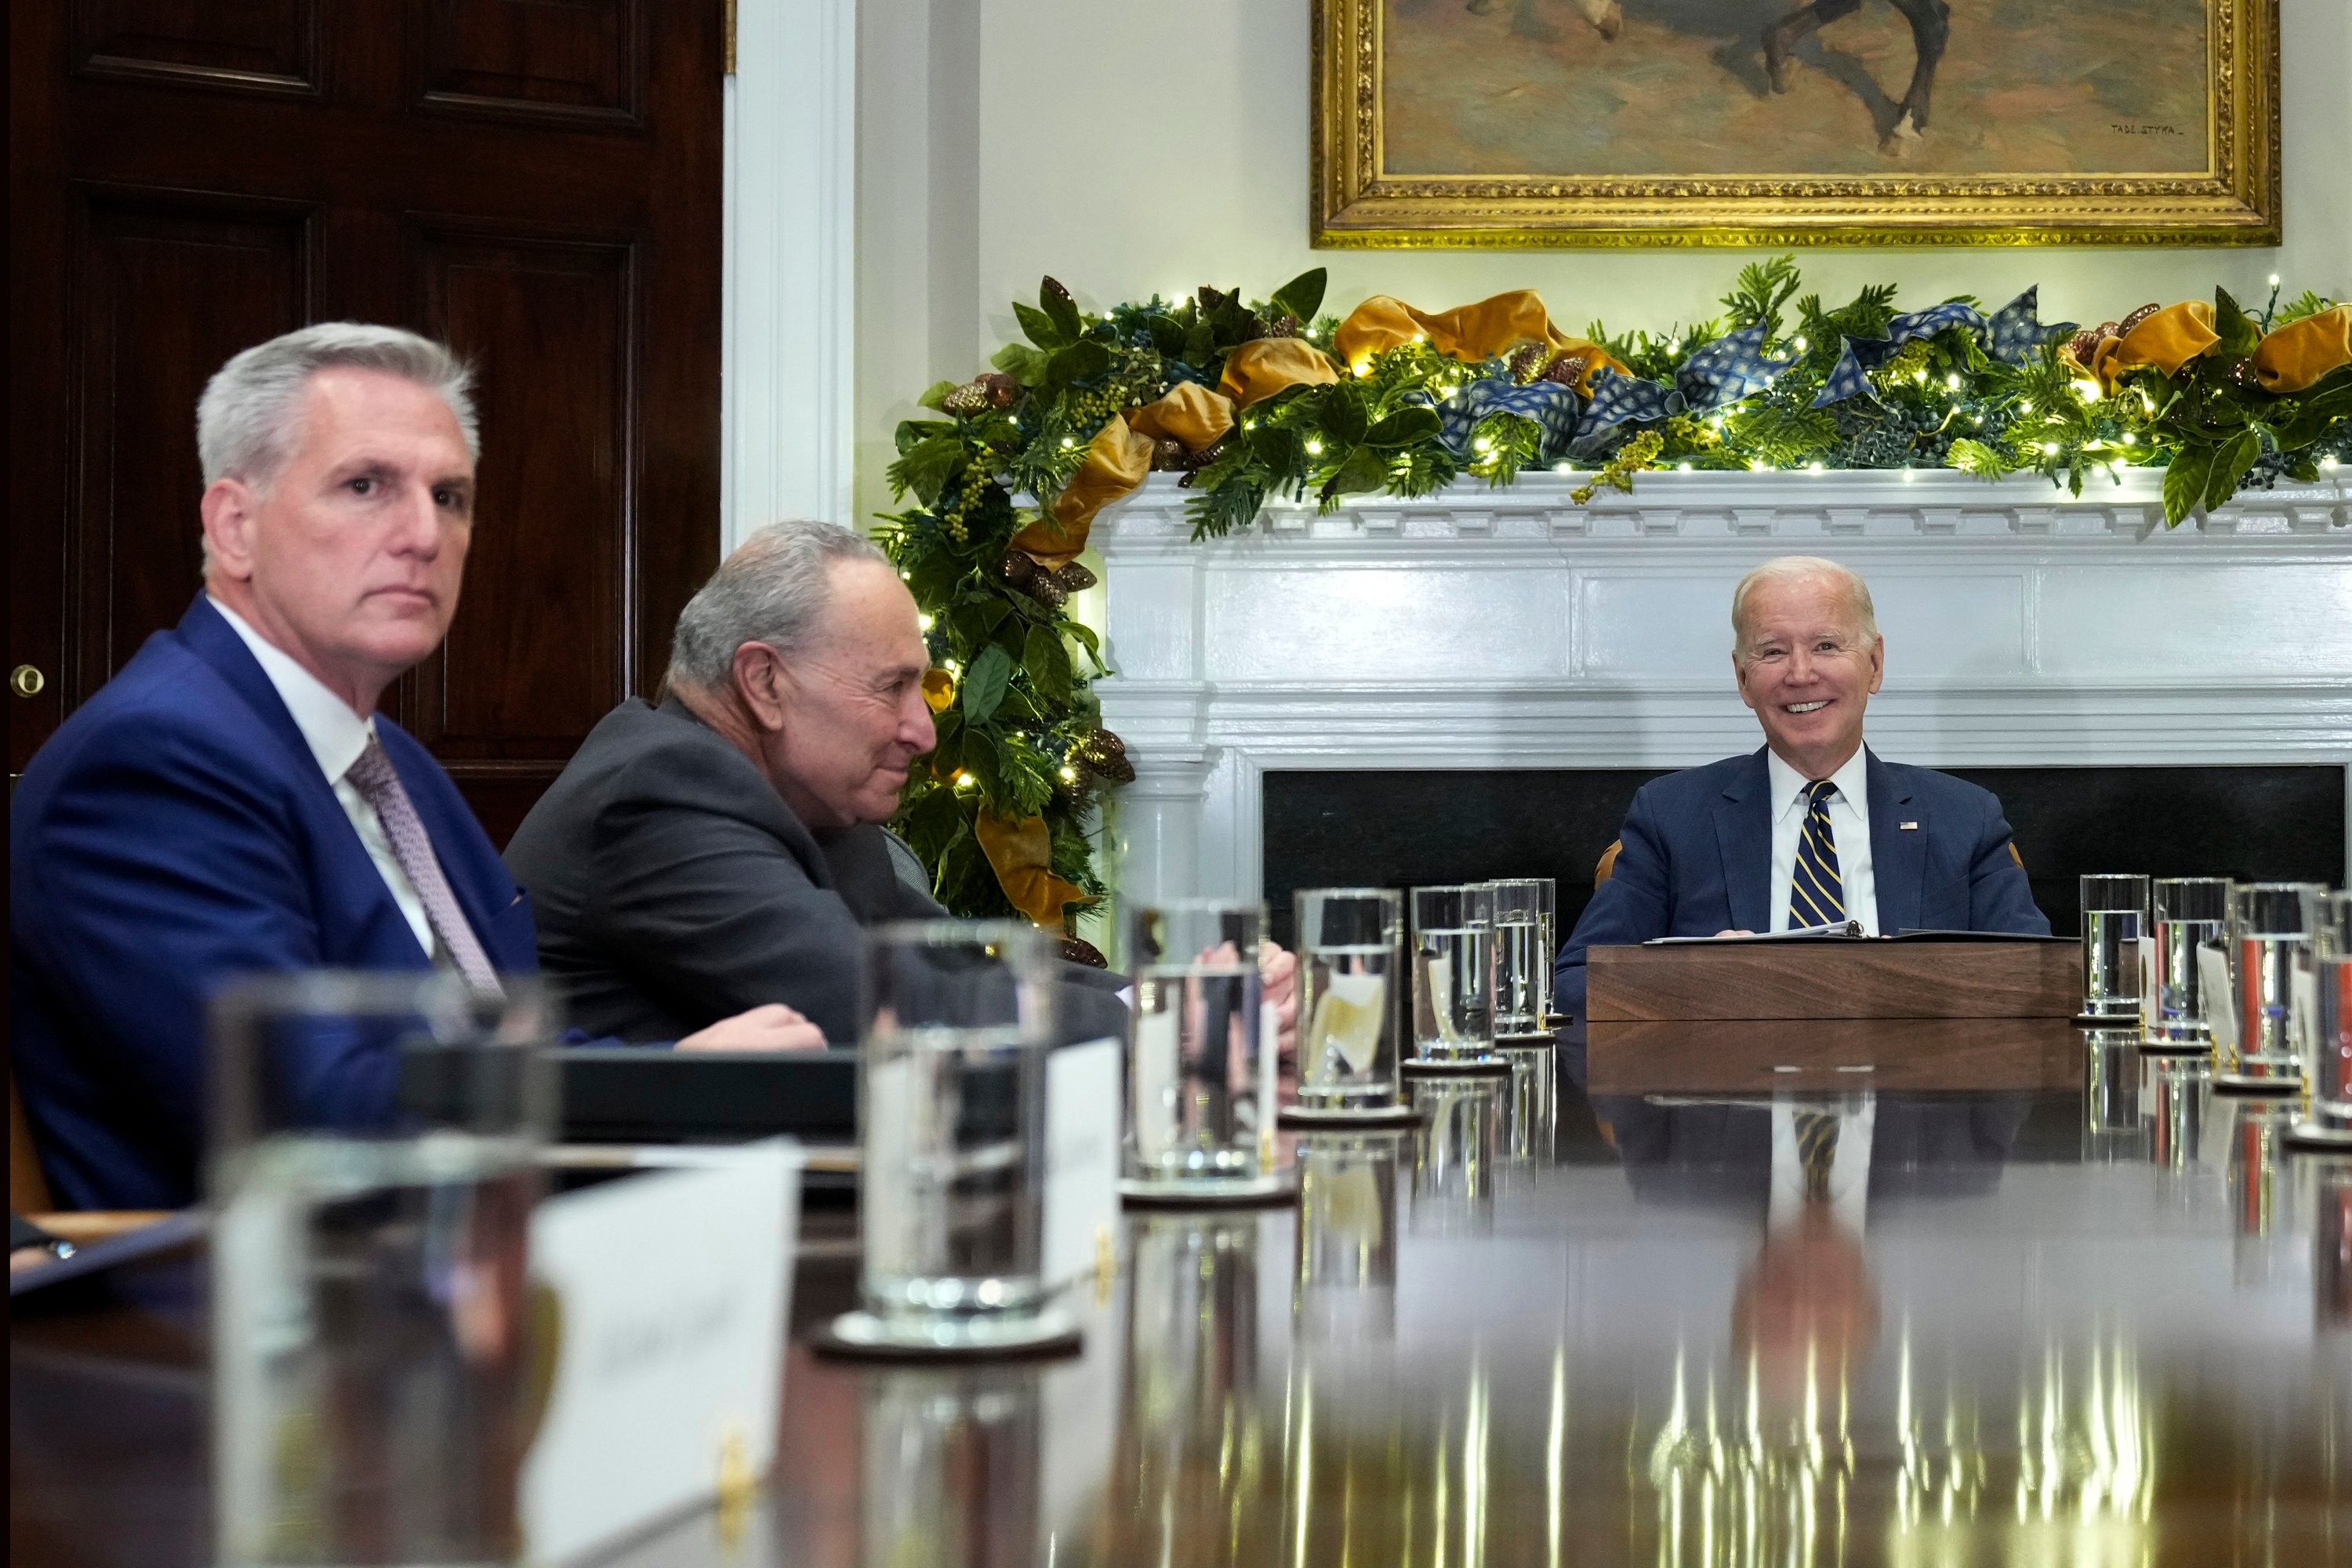 Biden and congressional leaders at impasse on debt ceiling after